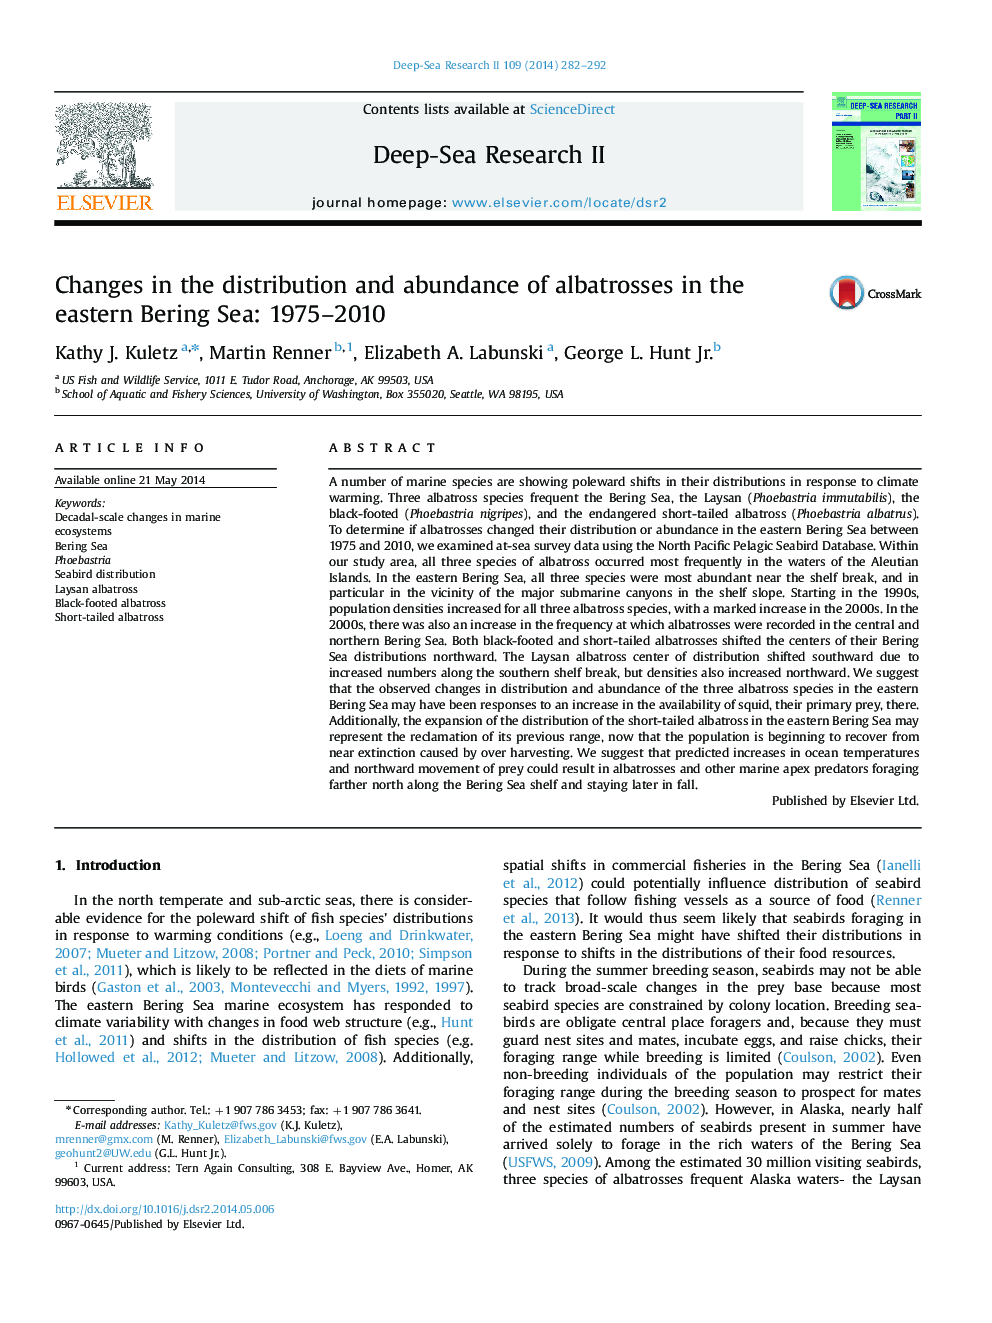 Changes in the distribution and abundance of albatrosses in the eastern Bering Sea: 1975-2010